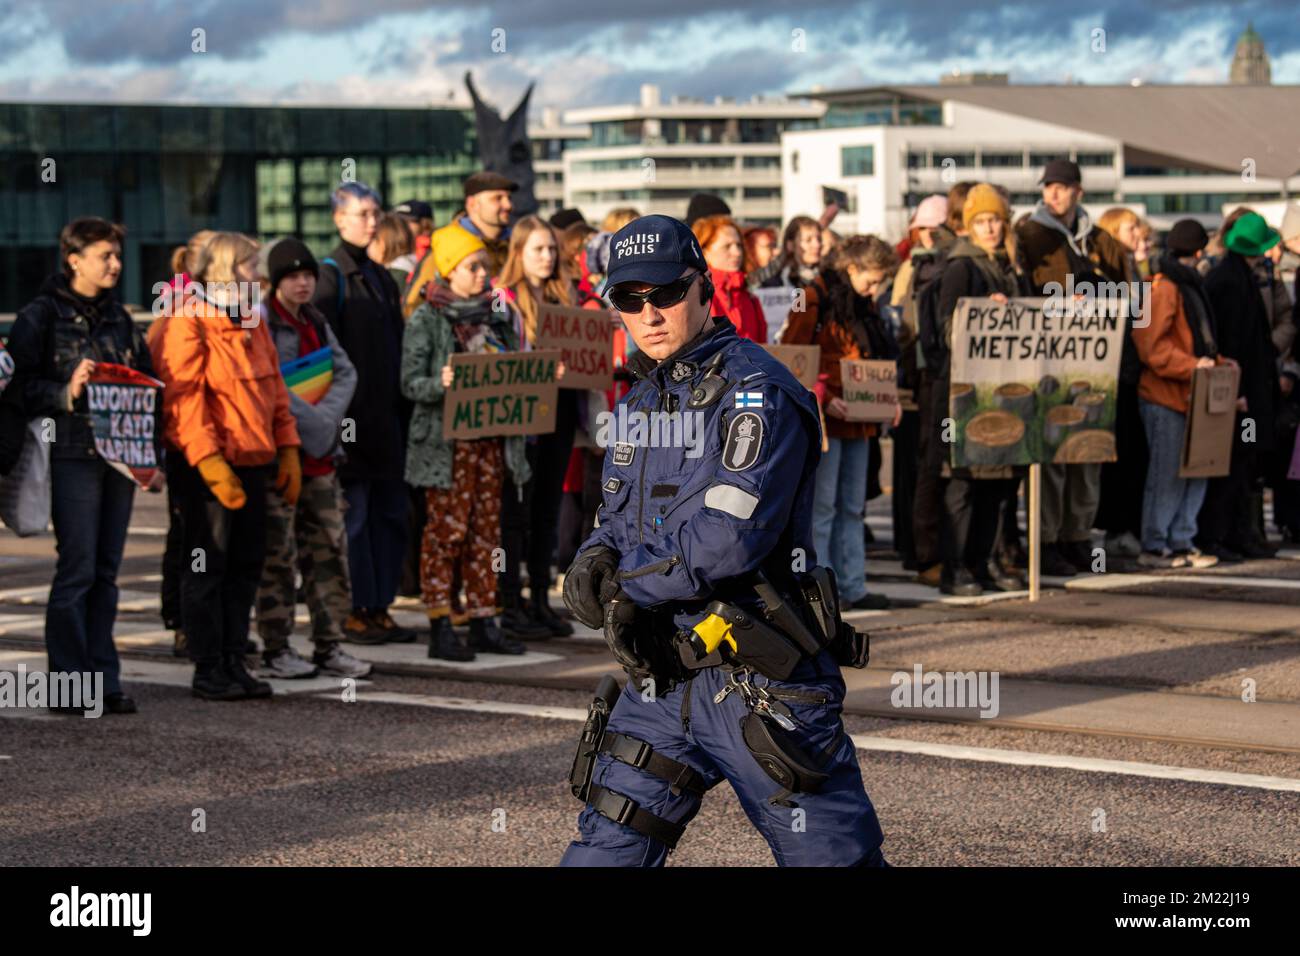 Police officer with sunglasses looking at camera at Elokapina or Extinction Rebellion road blocking protest on Mannerheimintie in Helsinki, Finland. Stock Photo